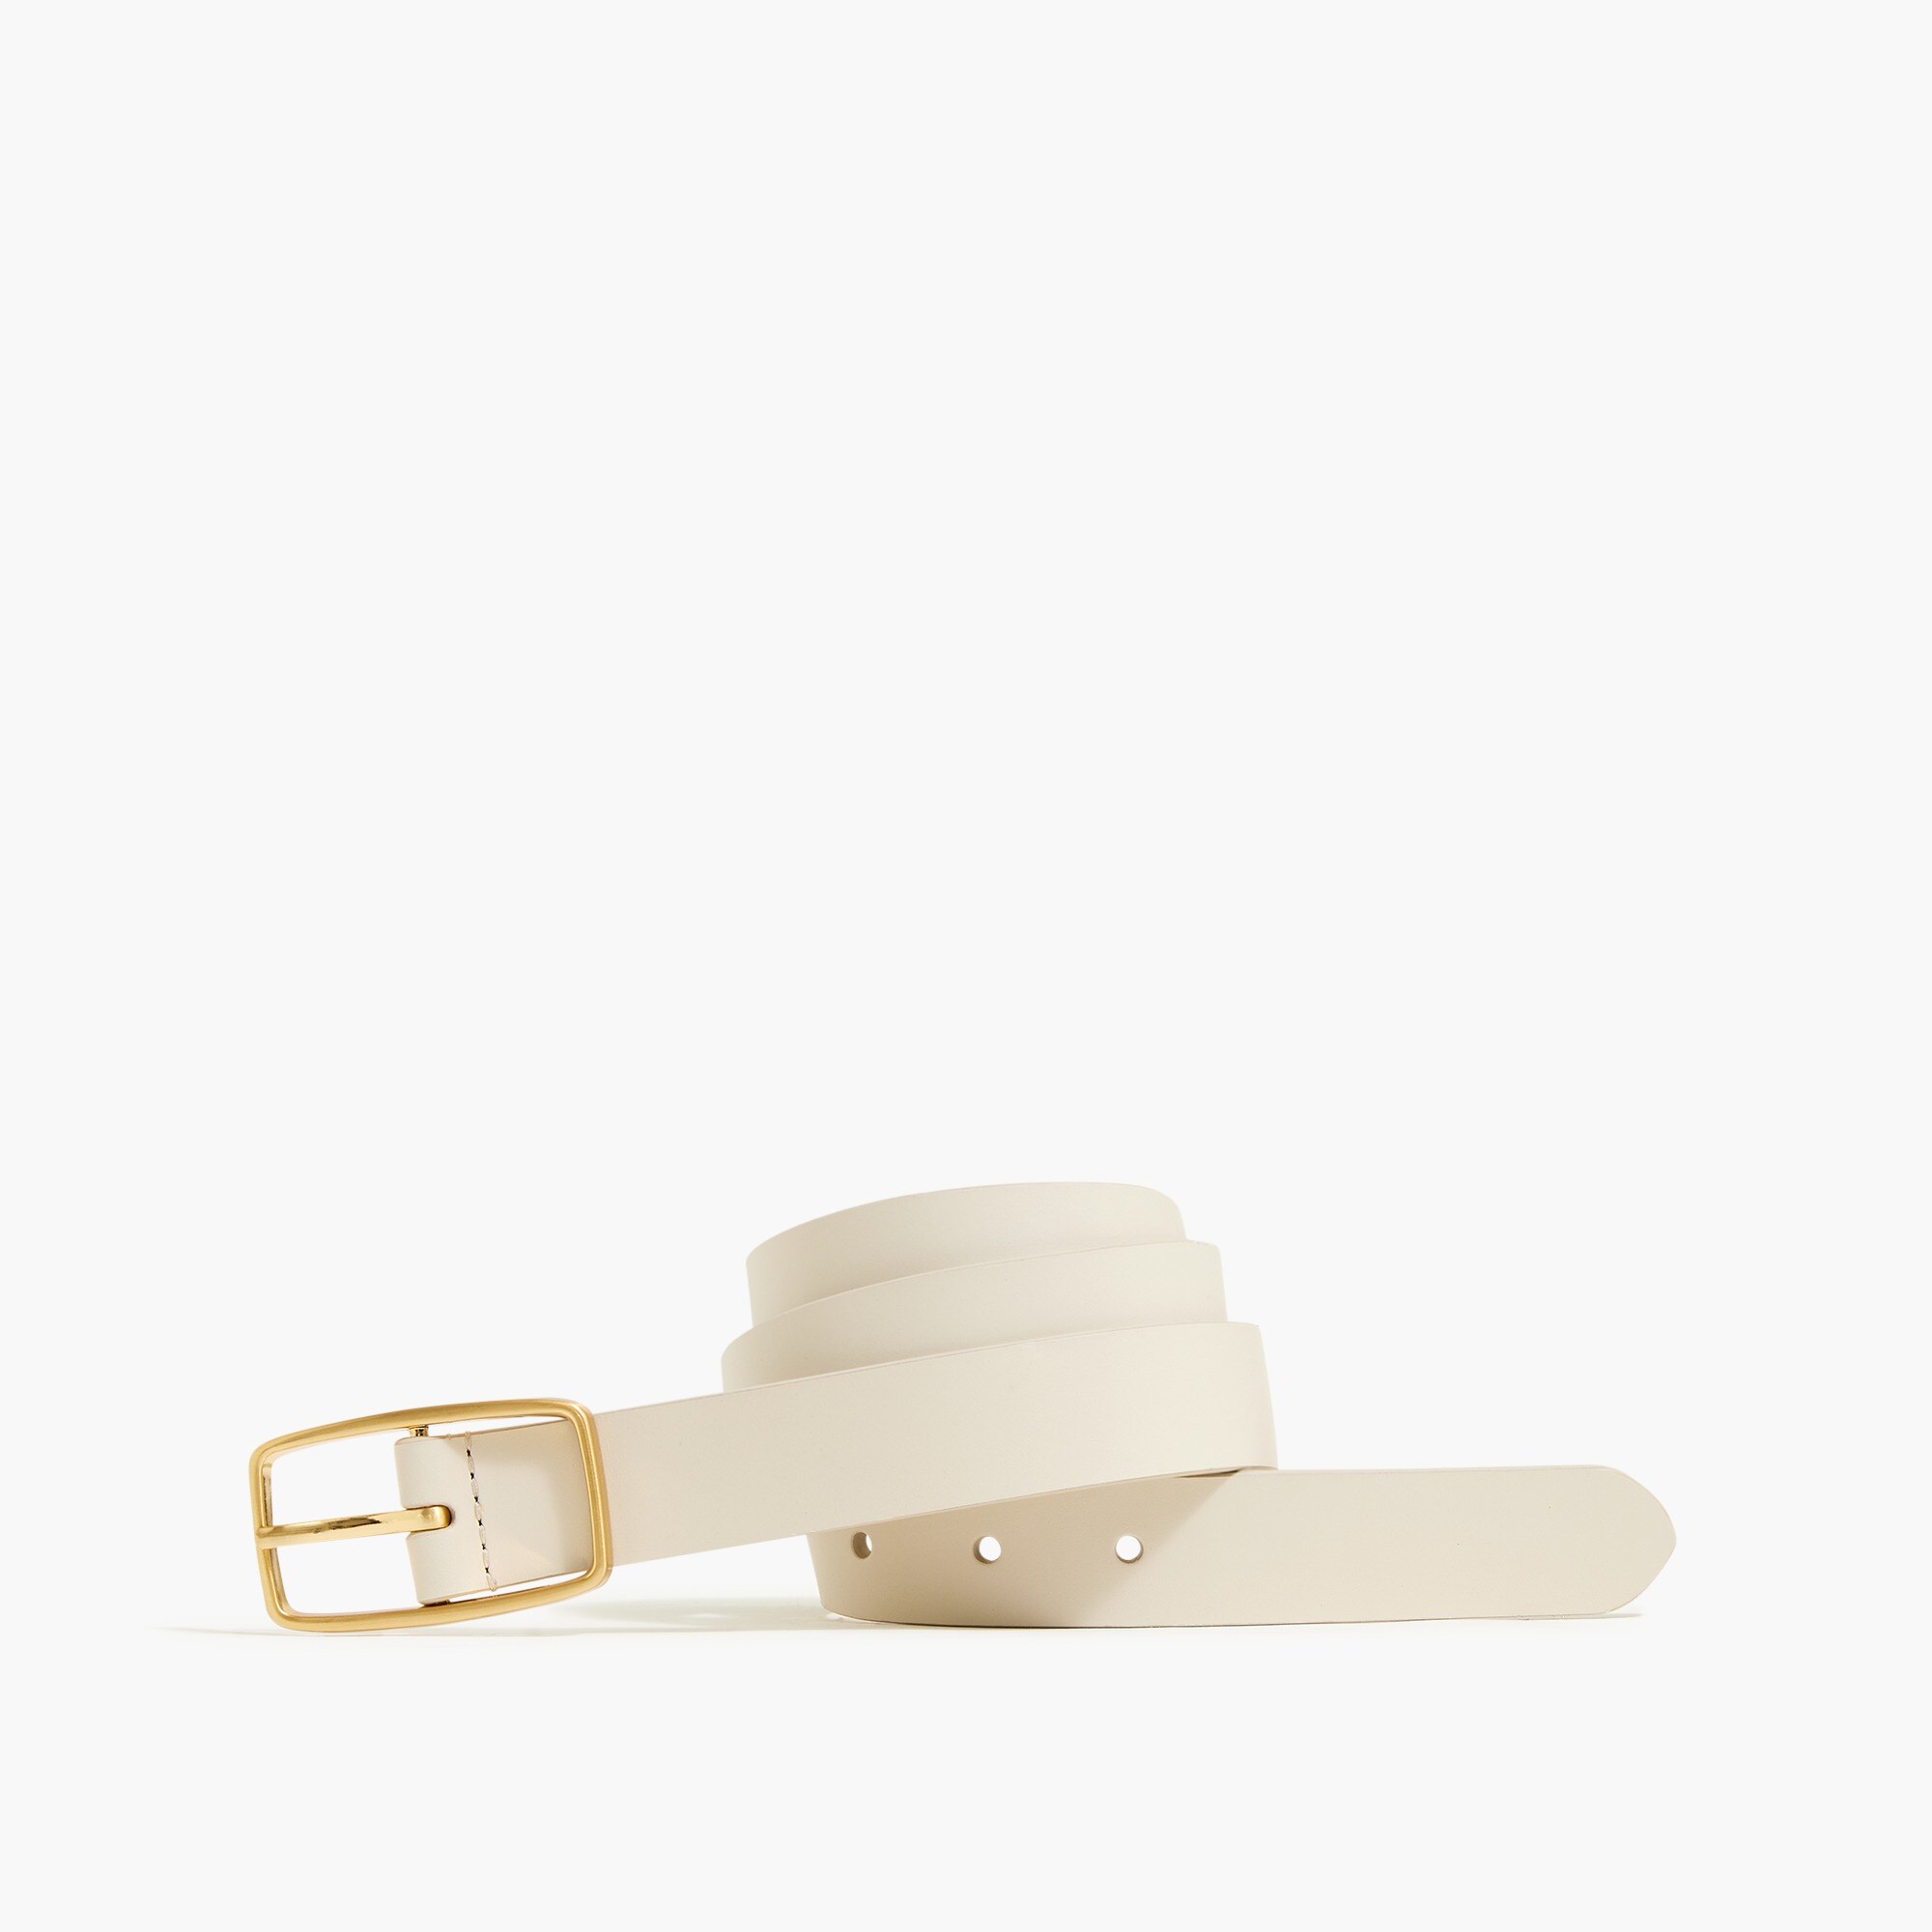  Leather belt with gold-tone buckle